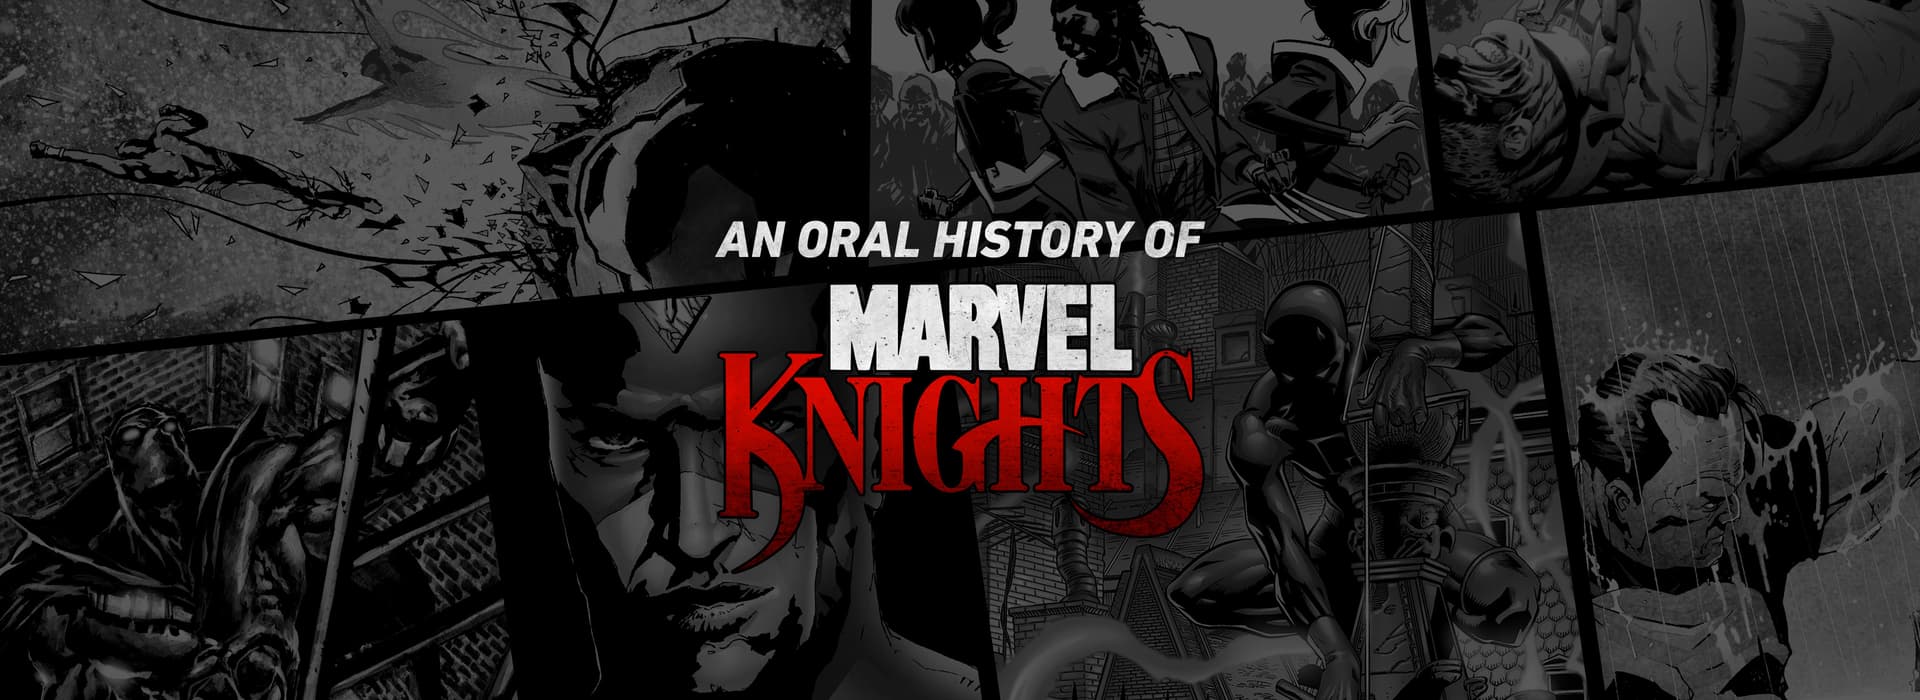 Marvel Knights: An Oral History